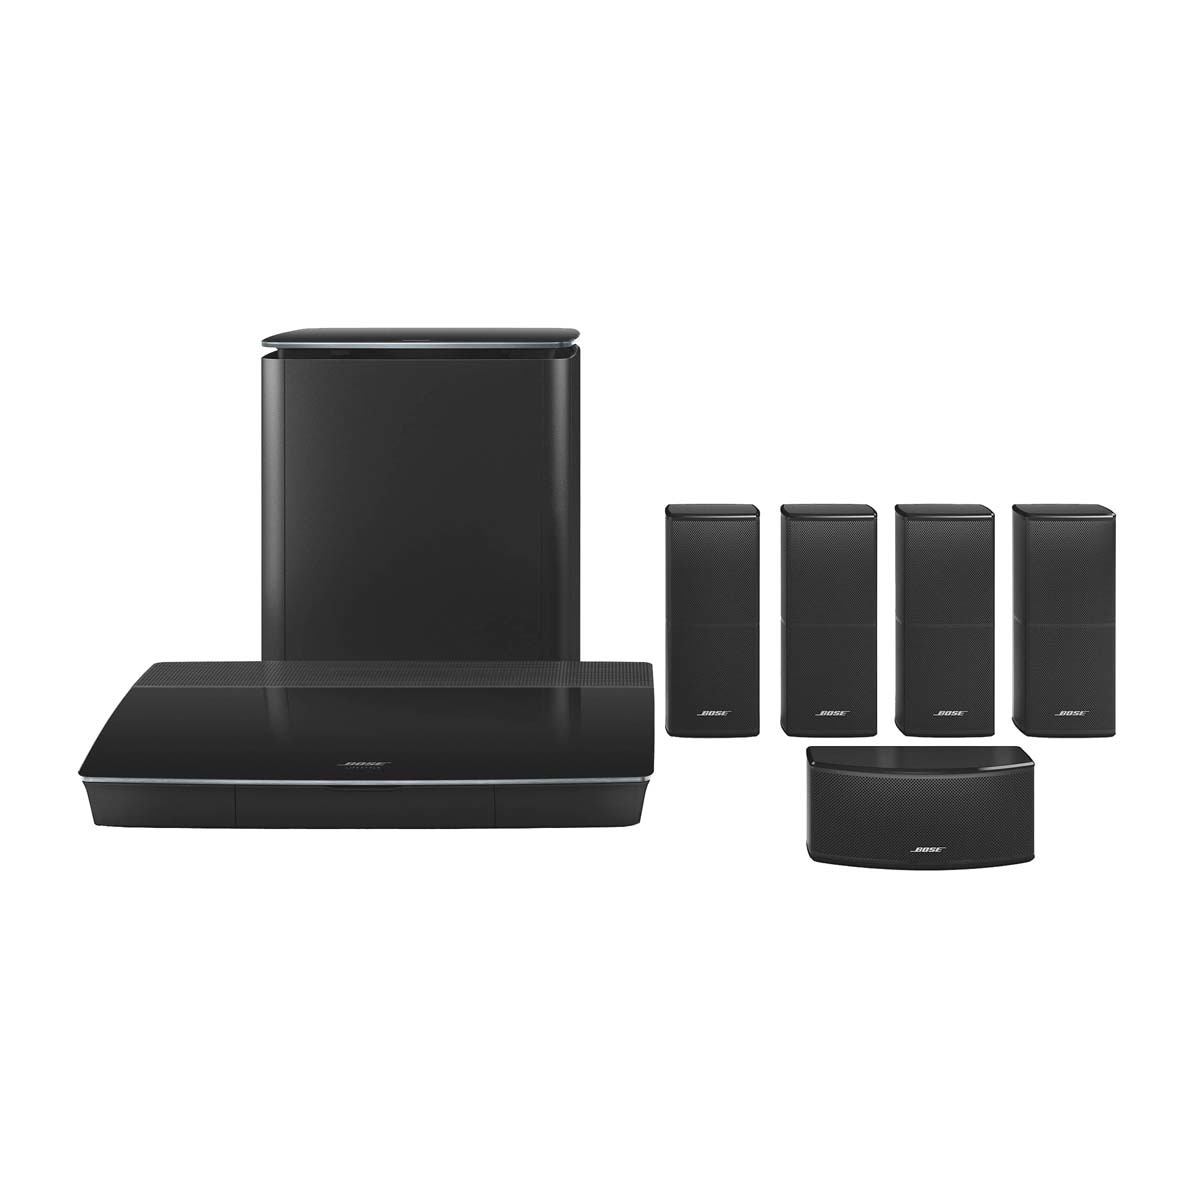 Home Cinema Bose Lifestyle SoundTouch 600 Wi-Fi y Bluetooth